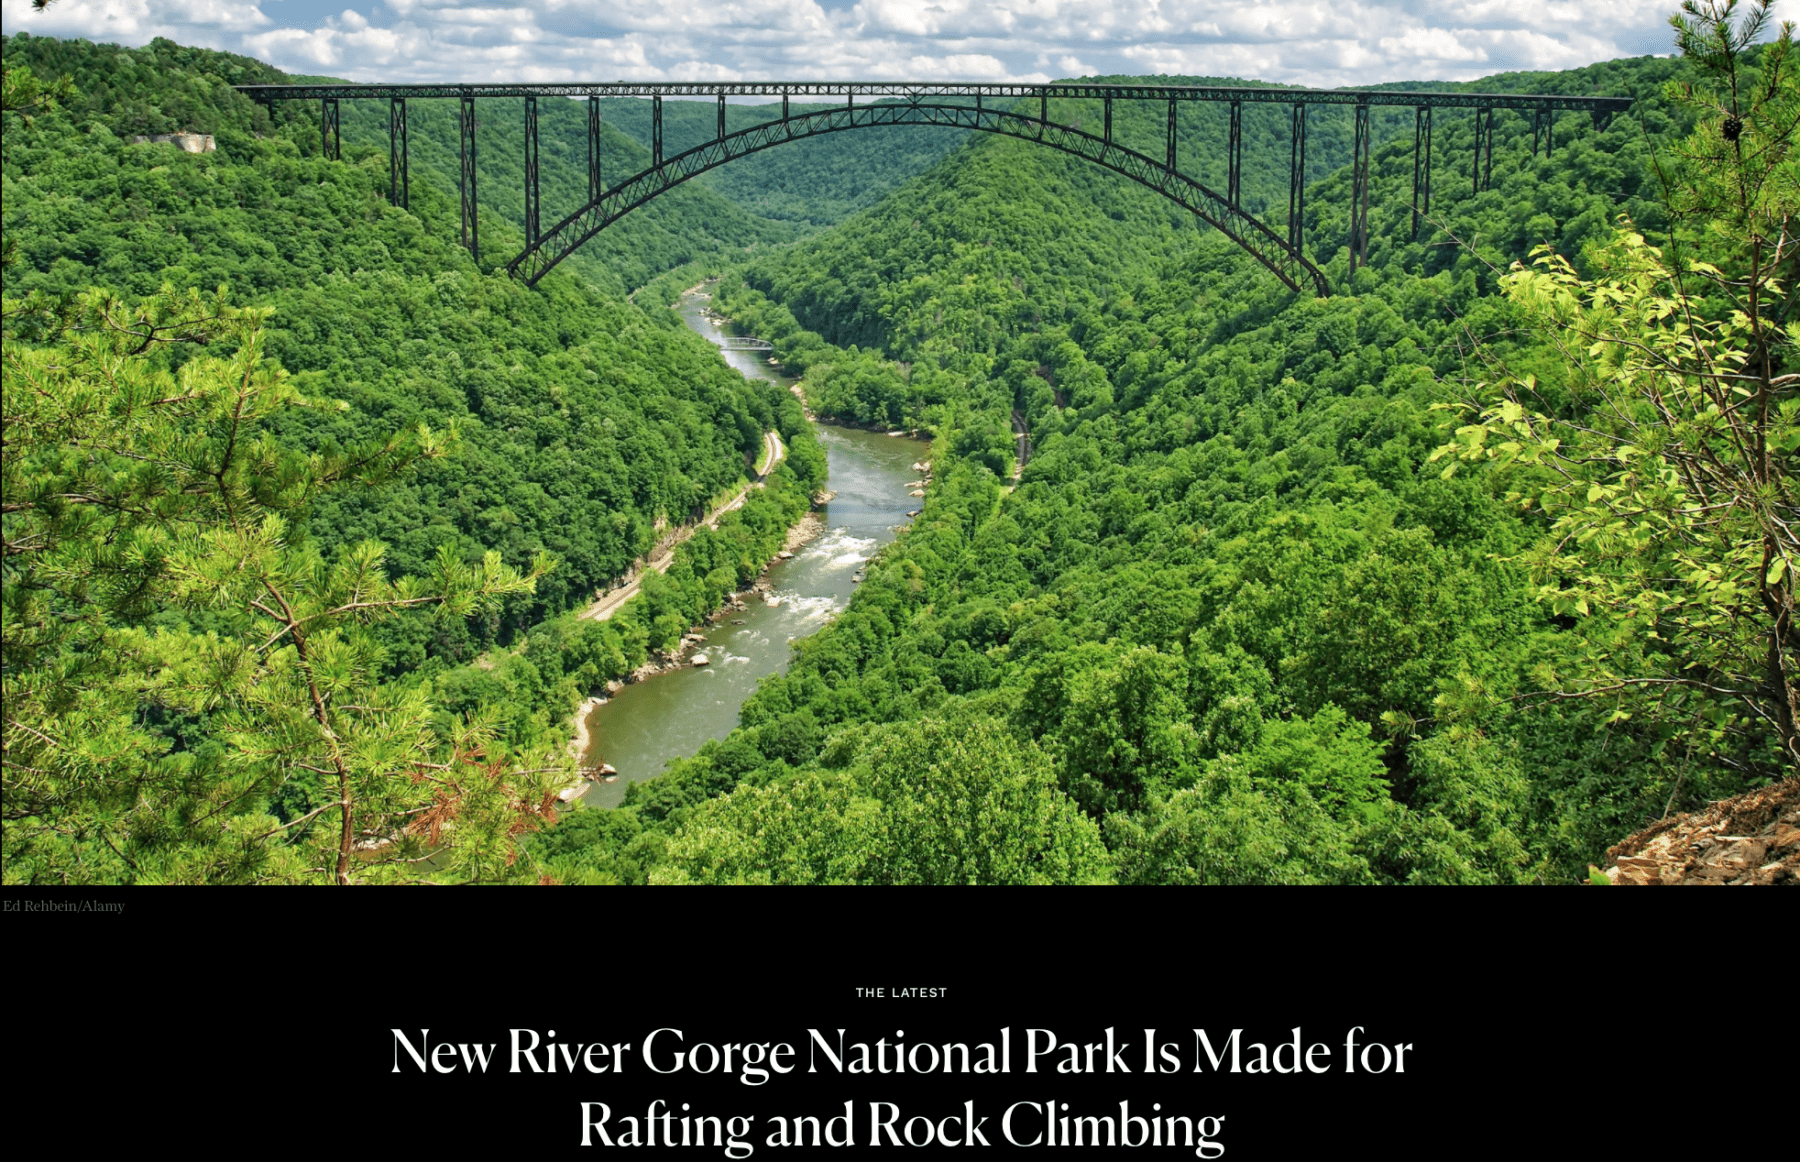 Screenshot of an article titled New River Gorge National Park is Made for Rafting and Rock Climbing with an image of lush greenery and a large trestle bridge going over the New River Gorge. 
